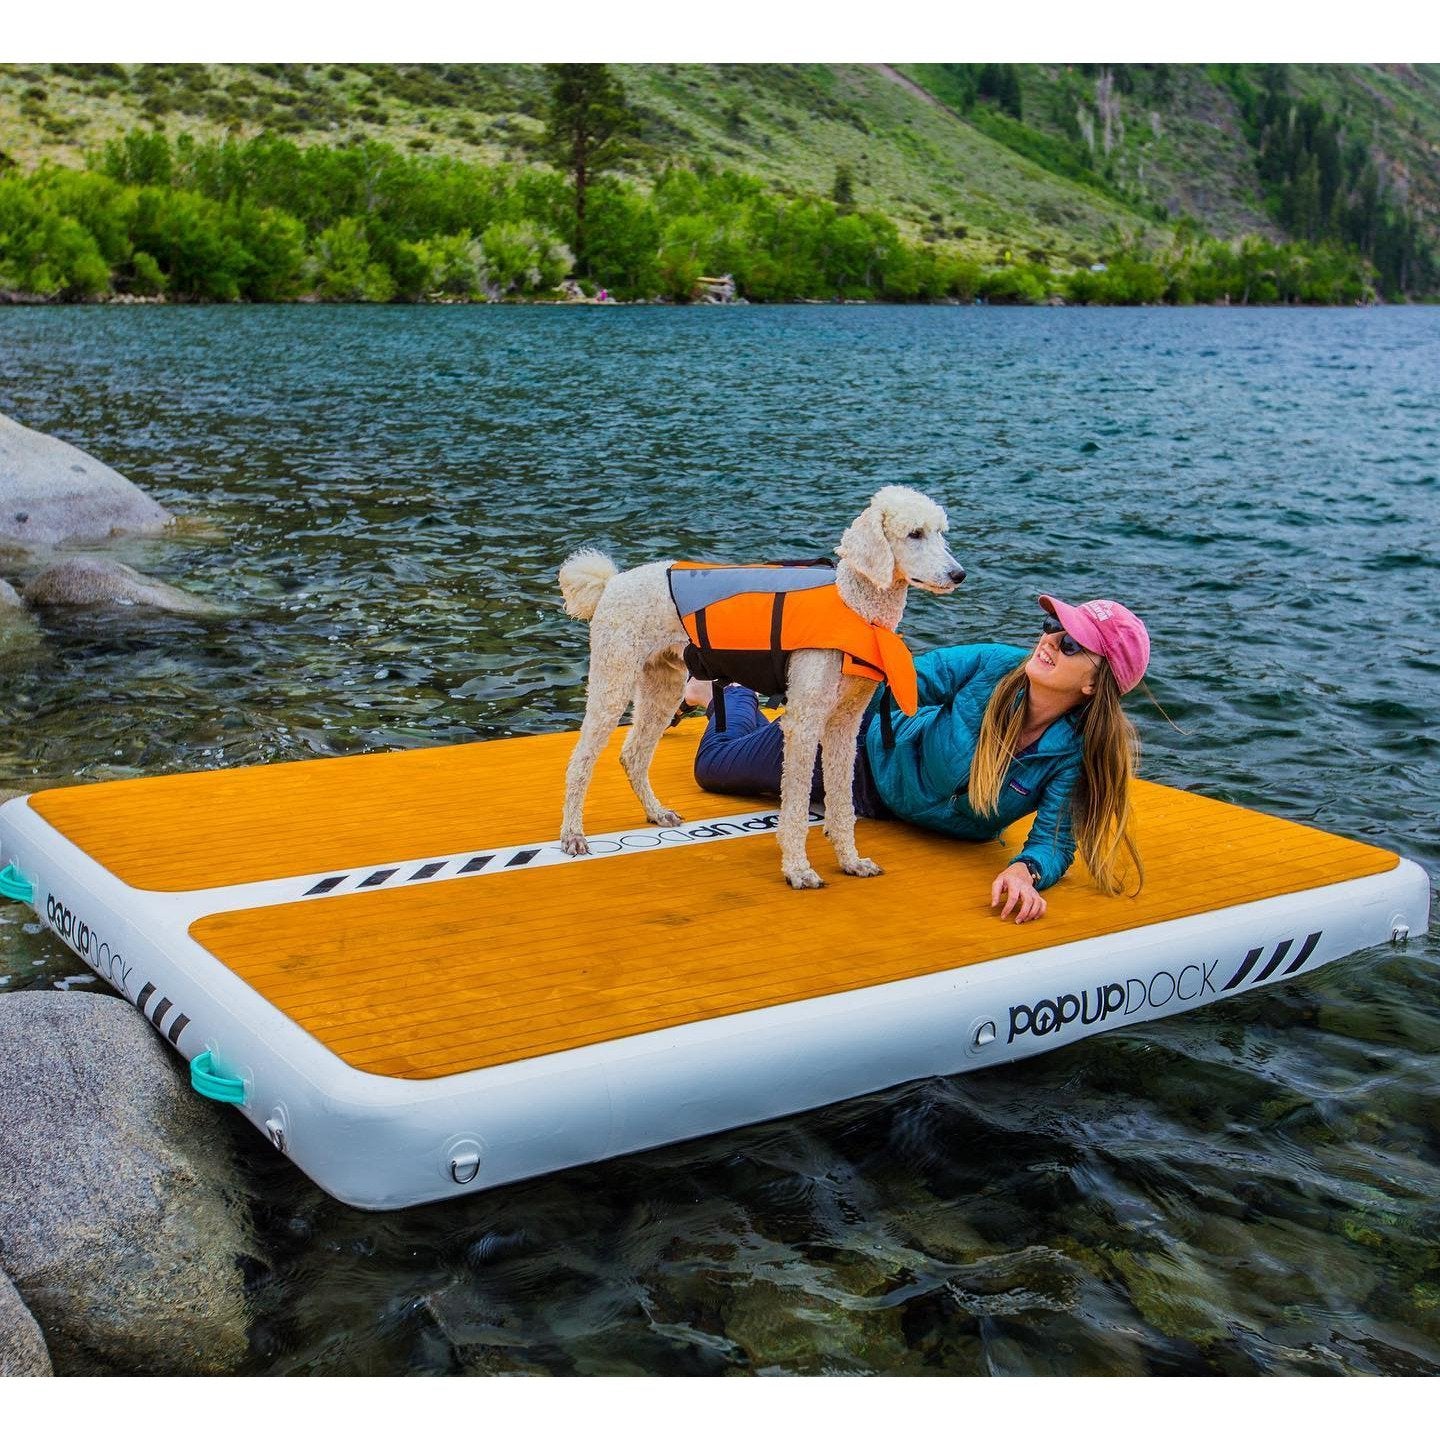 DWF Fishing Floating Water Platform Wear-resistant Inflatable Air Deck  Drop-stitch Dock + Paddles + Hand-pump for 1-3 Person